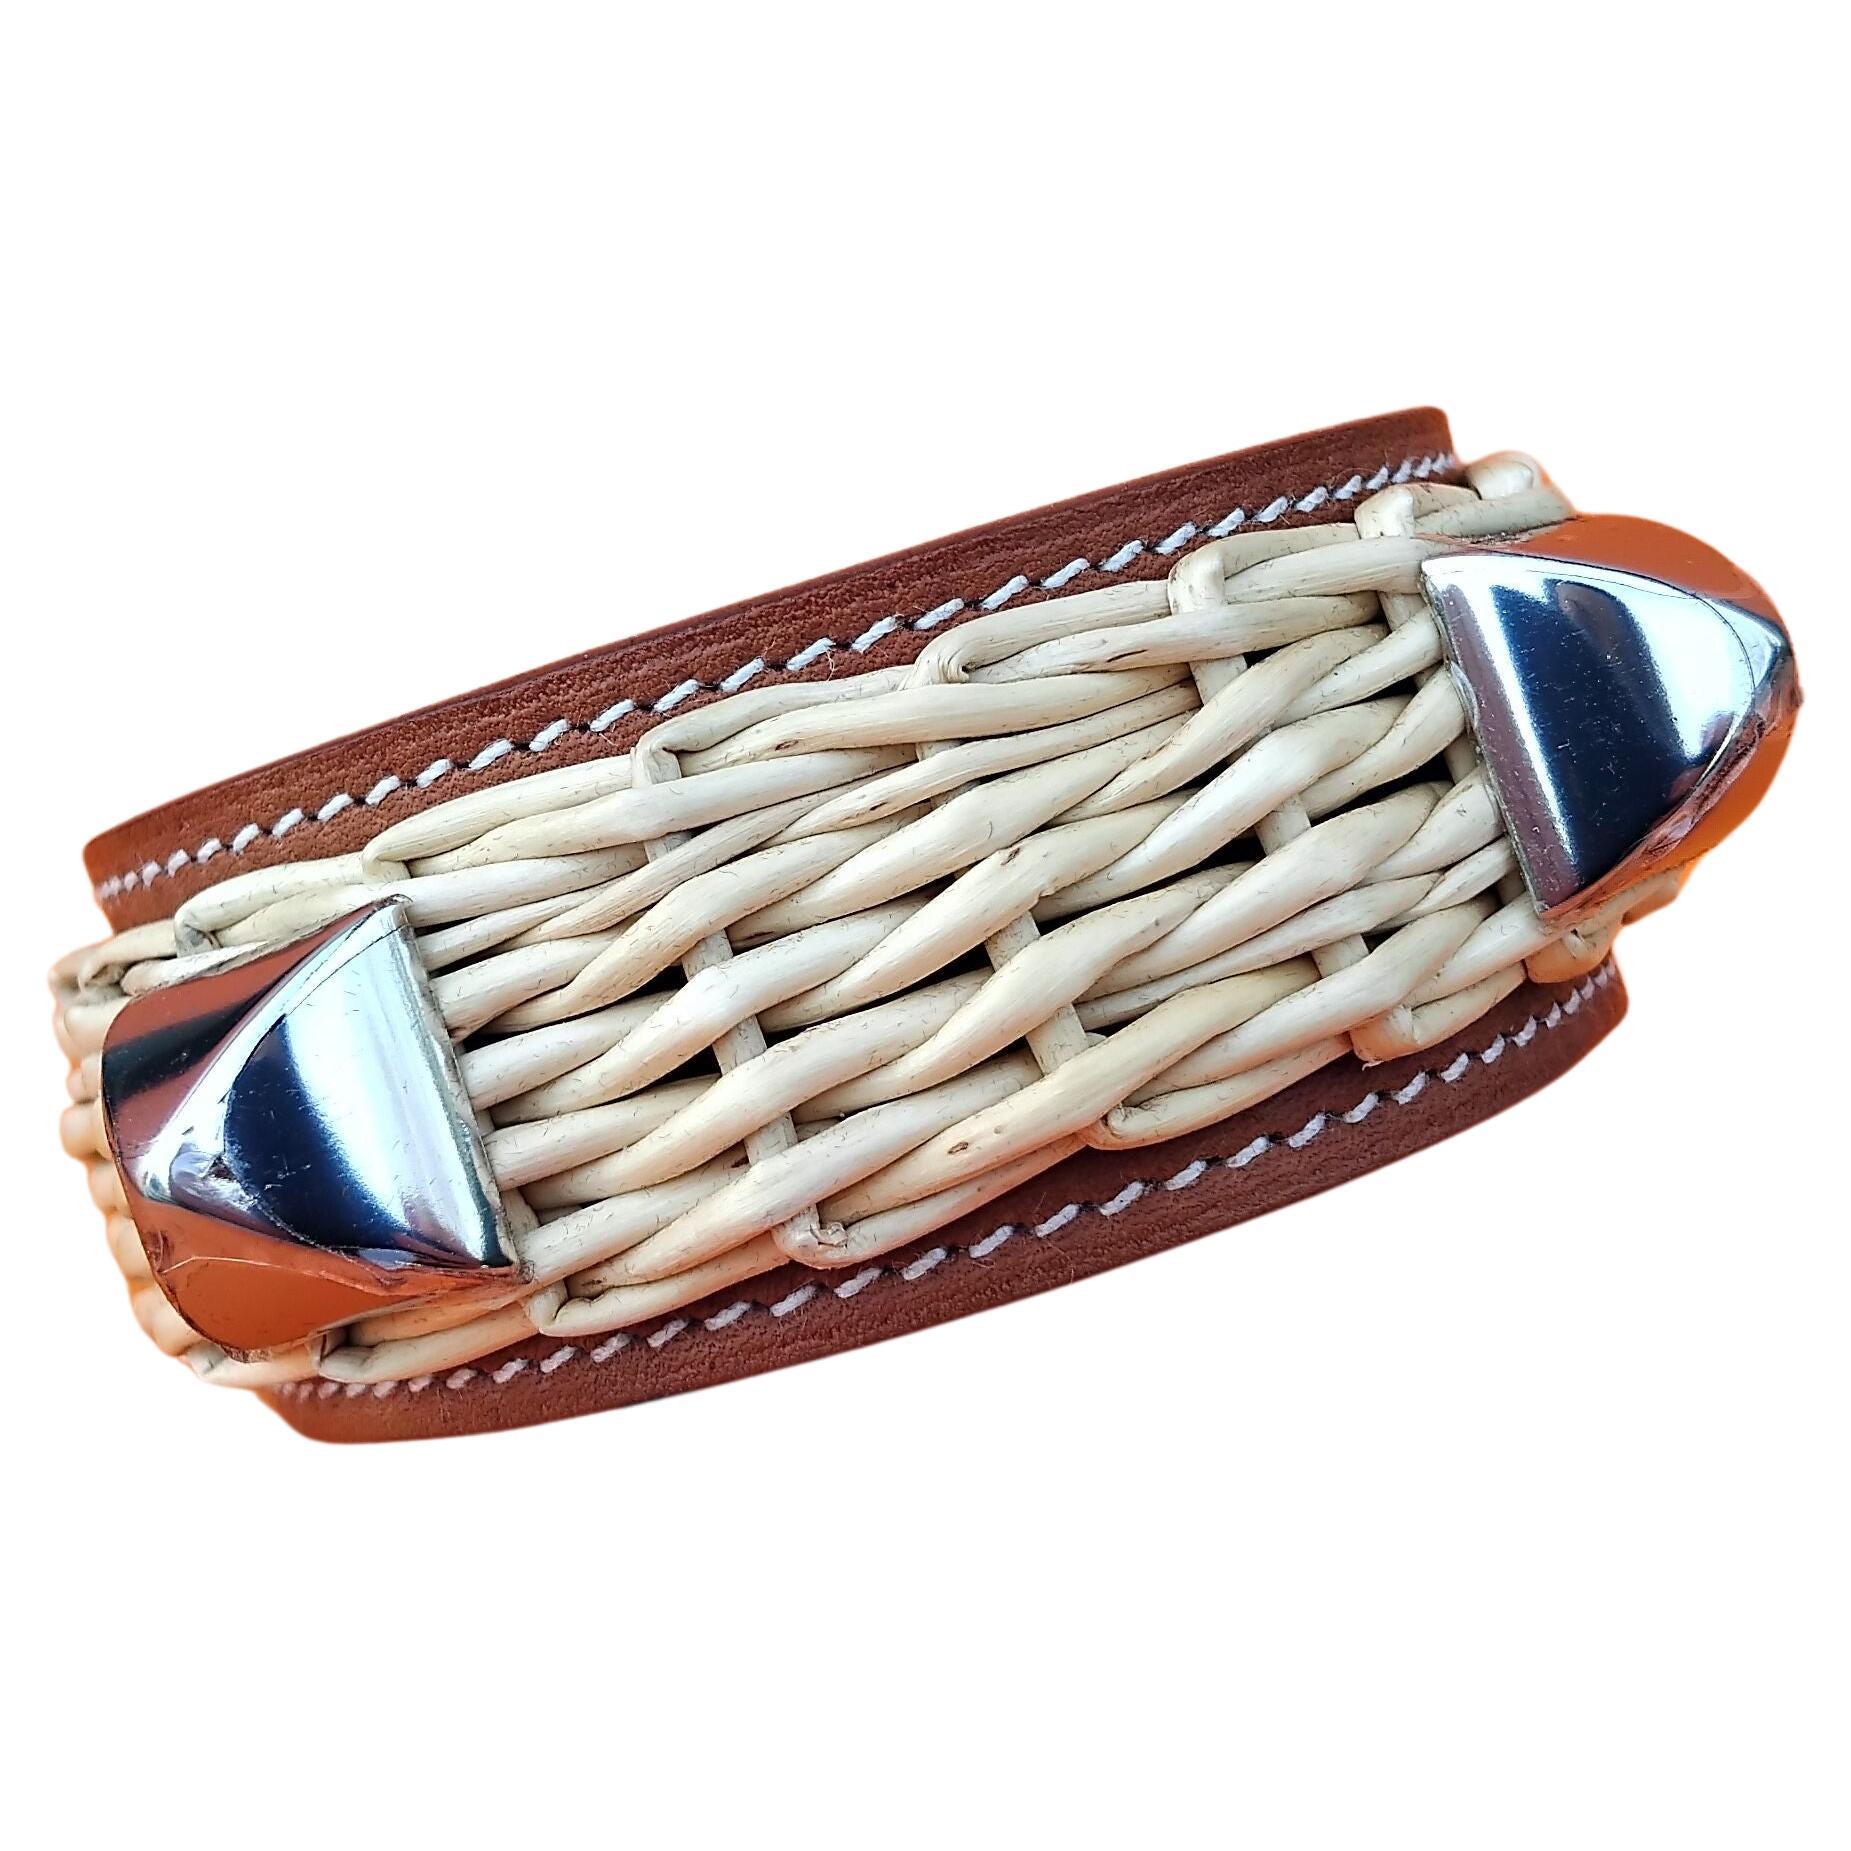 Stunning and Rare Authentic Hermès Bracelet

From the 